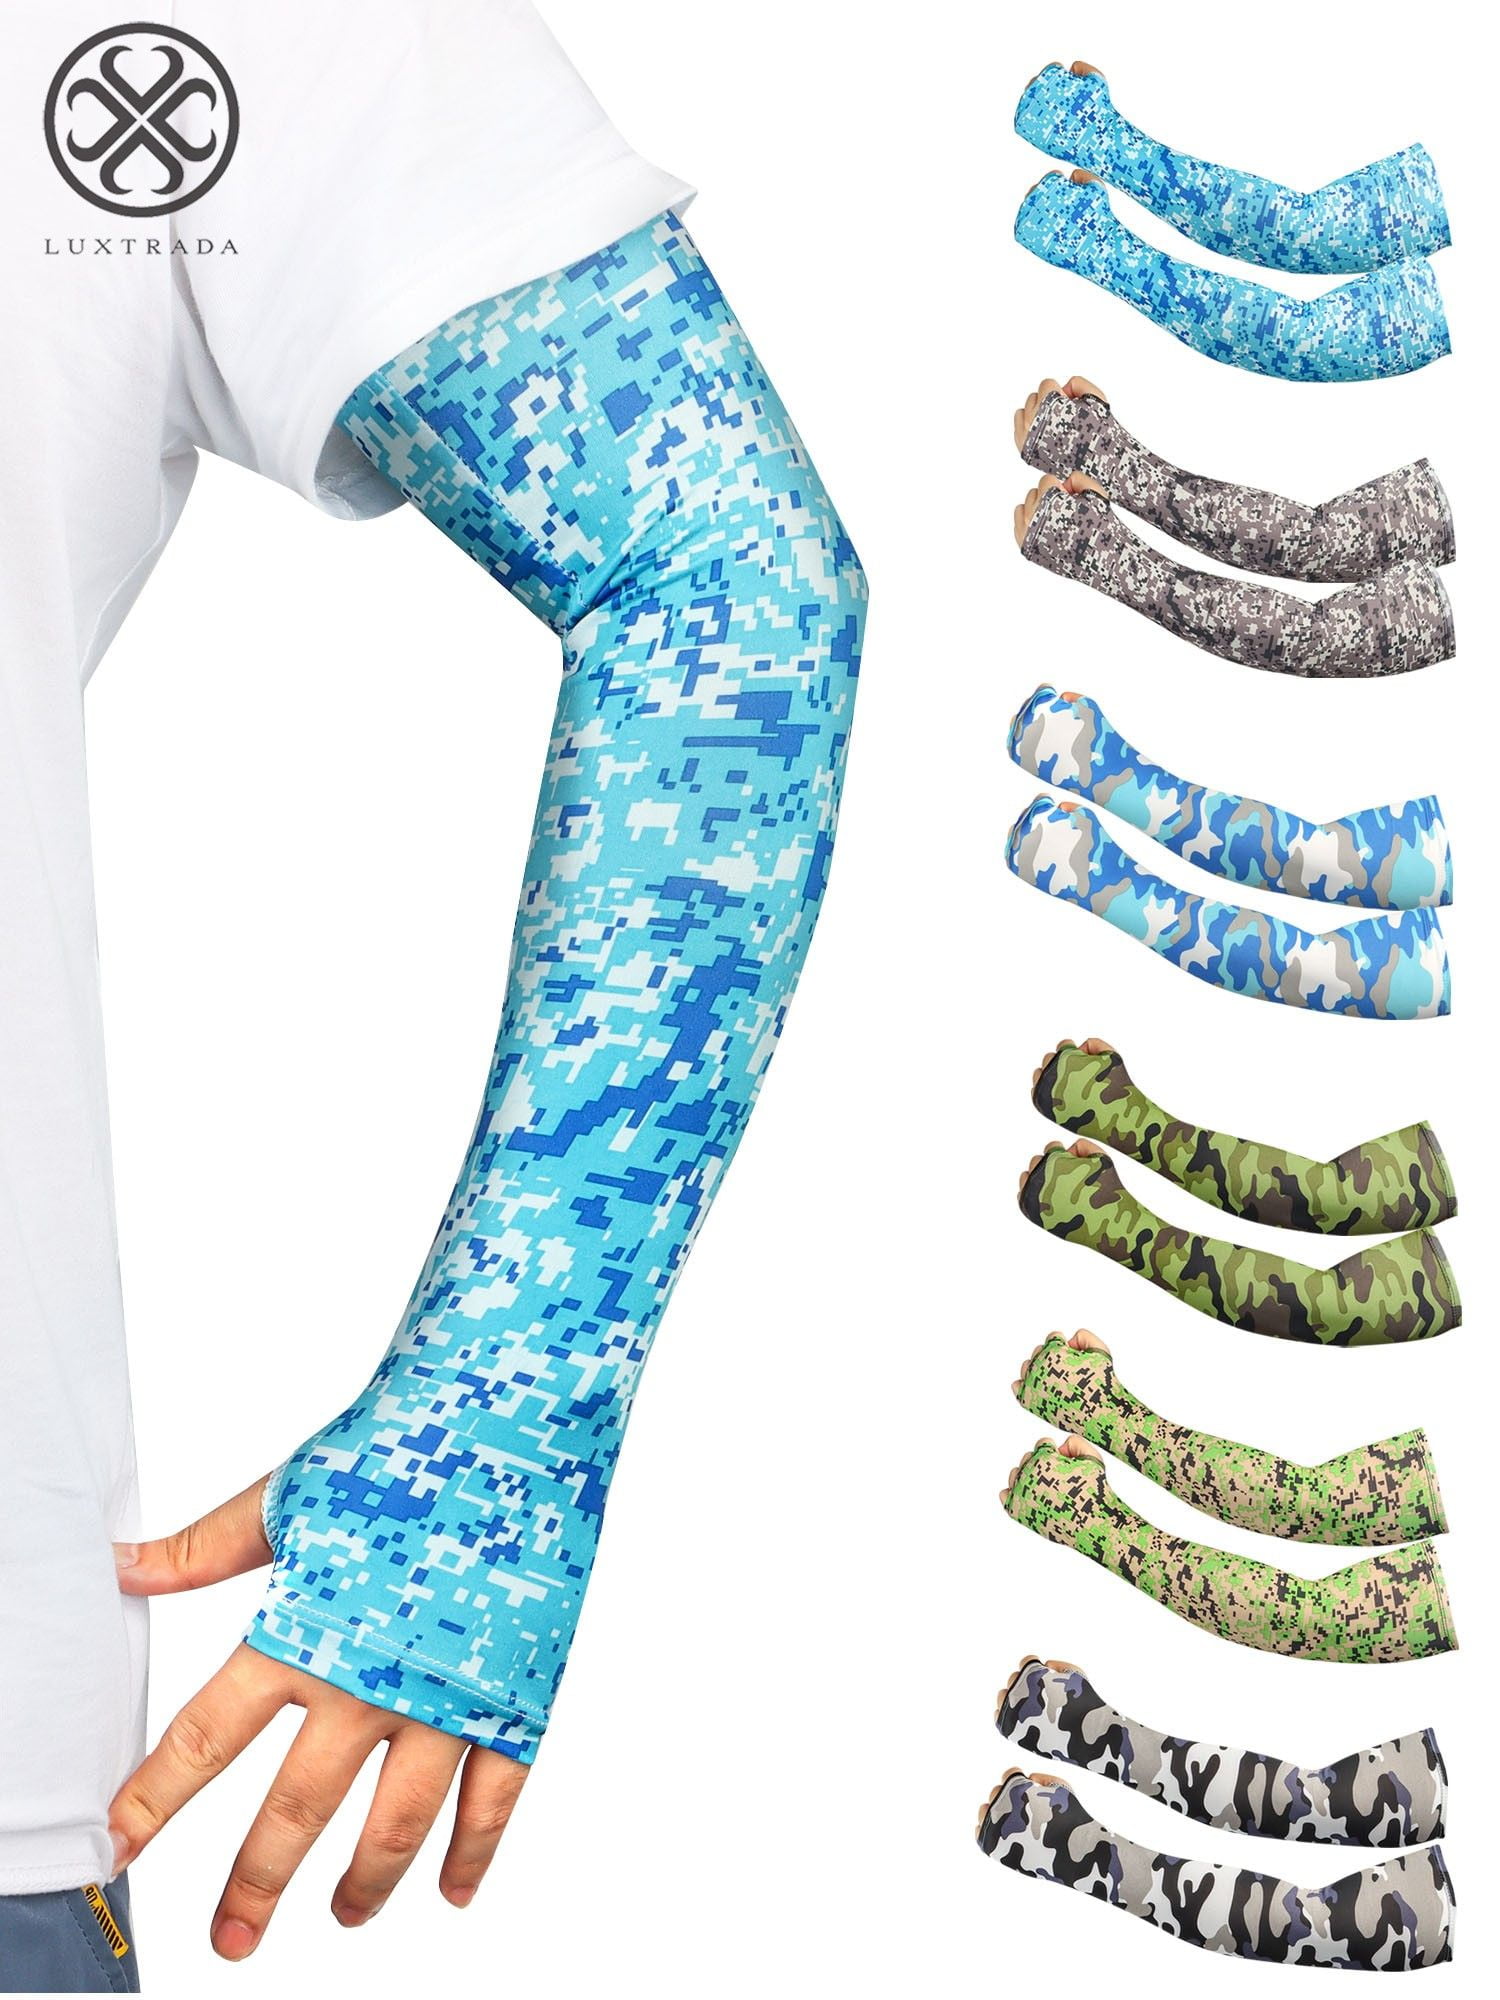 Sports Arm Sleeves Compression Protective Arm Sleeve Anti-Slip Real Tree Camo 